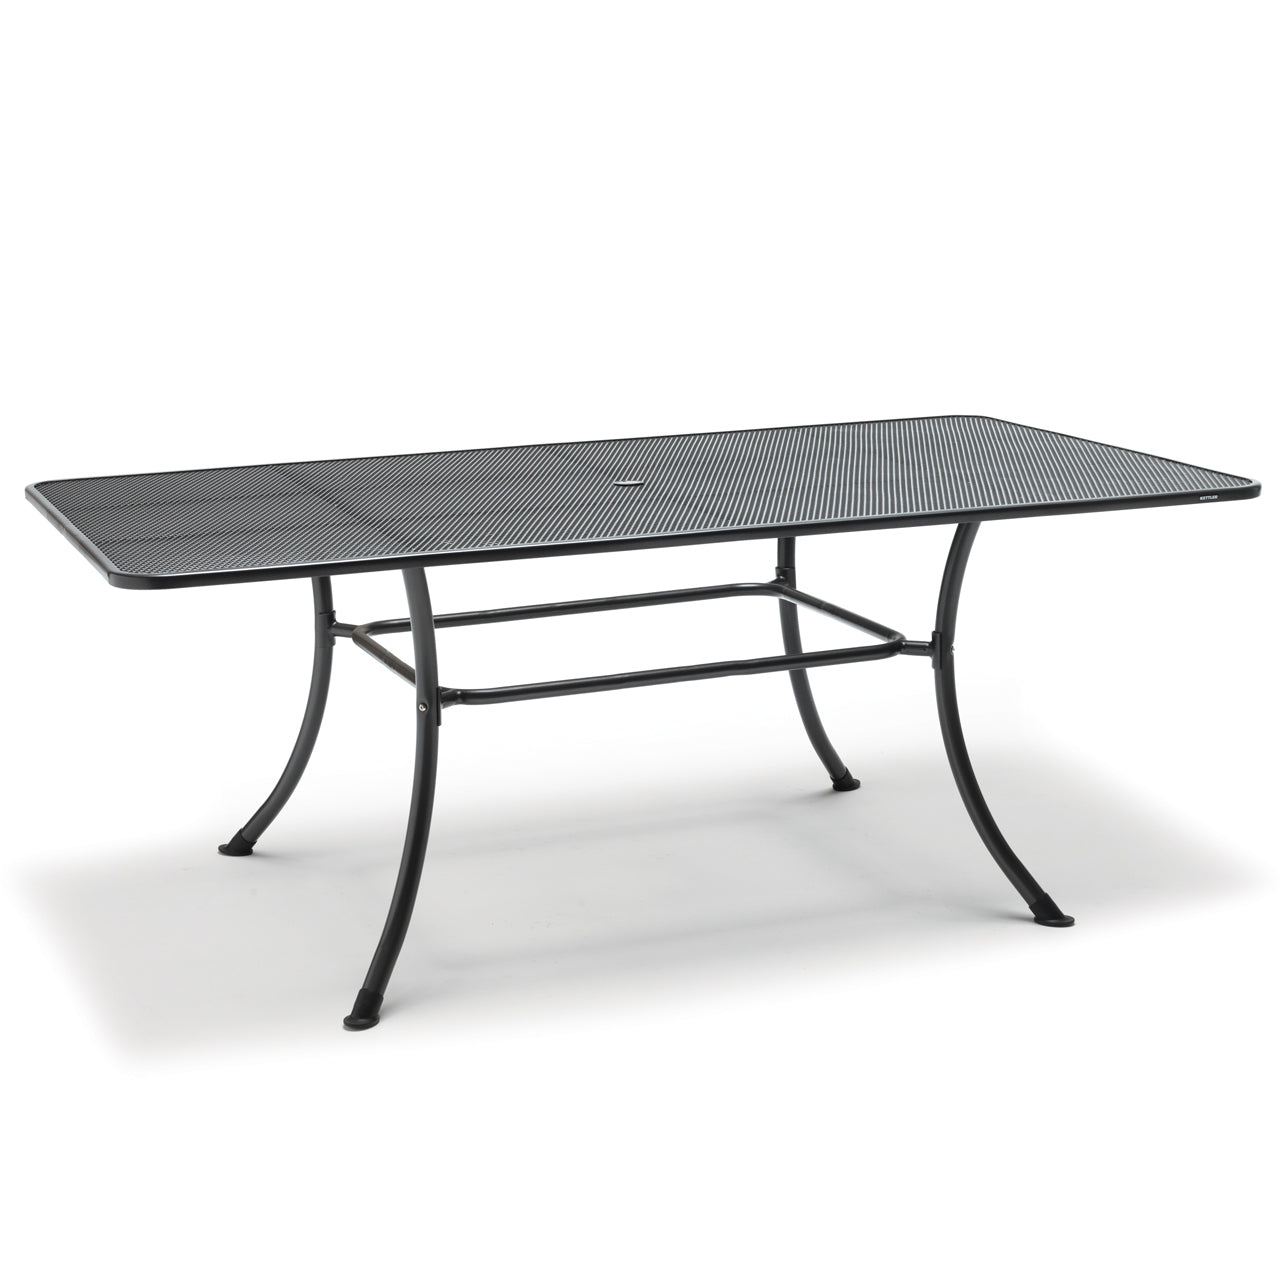 Rectangular wrought iron table with umbrella hole and built in floor levelers